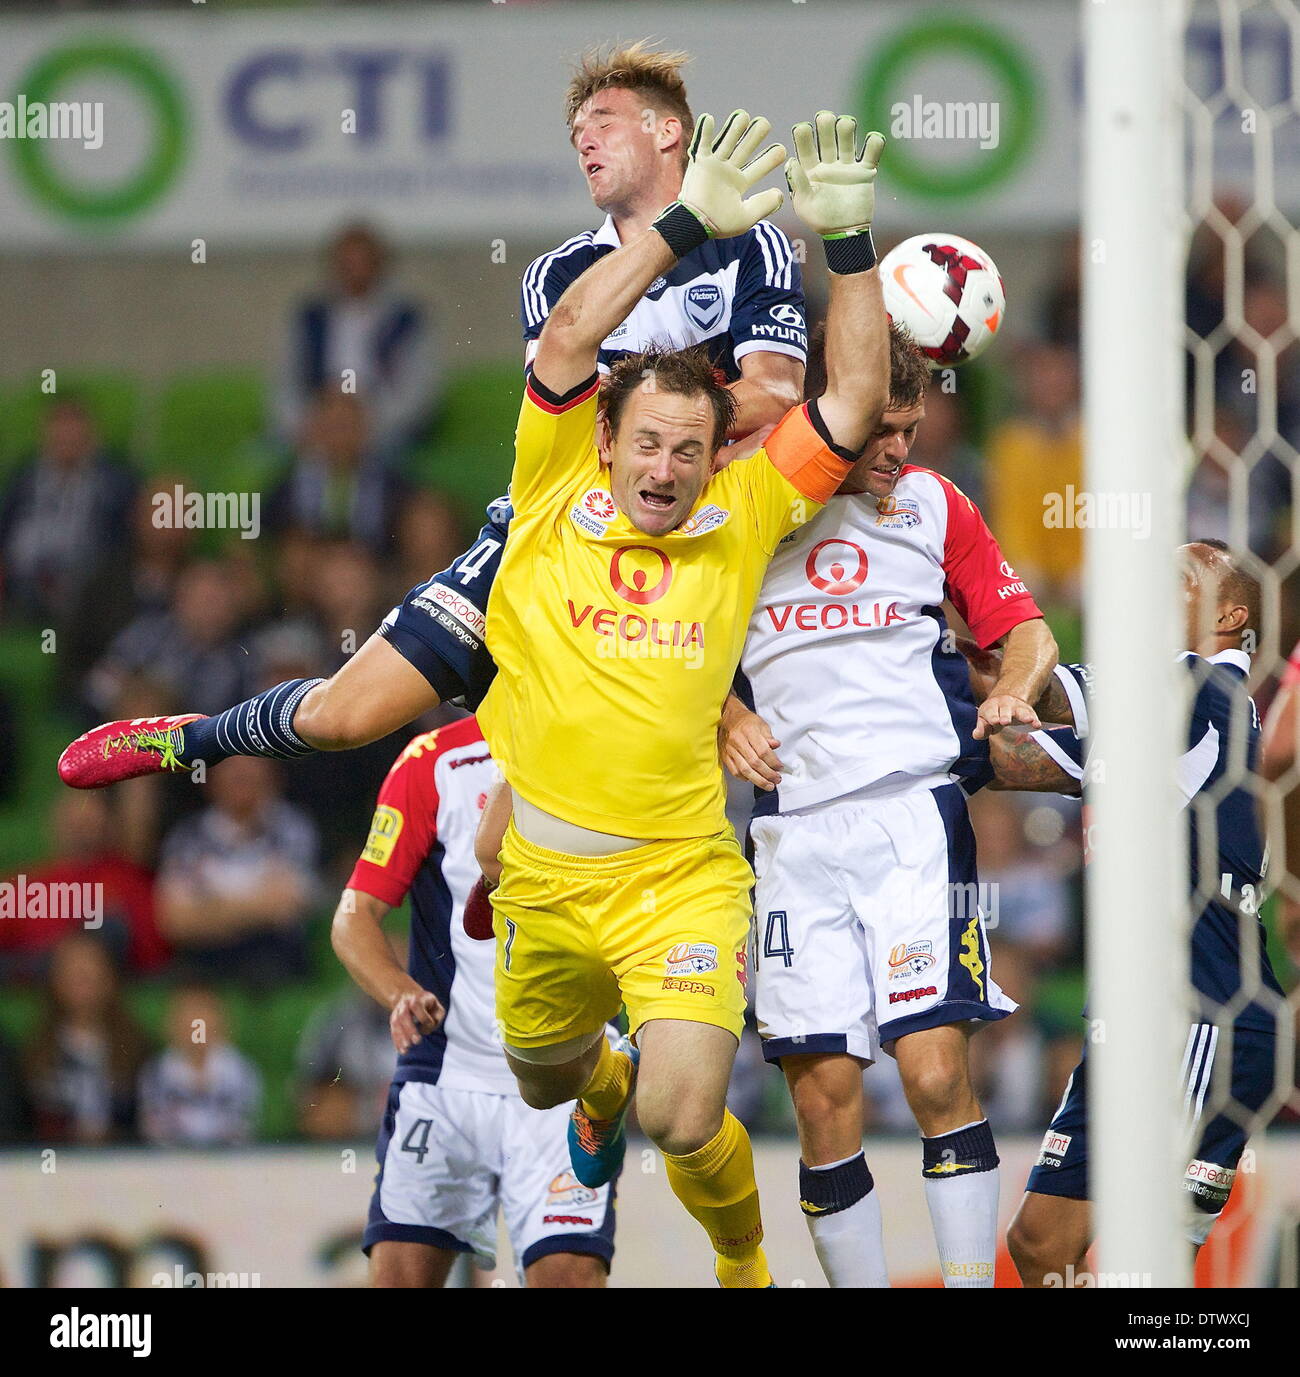 Melbourne, Australia. 22nd Feb, 2013. NICHOLA ANSELL (4) defender of Melbourne Victory tries to head the ball against EUGENE GALEKOVIC of Adelaide United during the round 20 match between Melbourne Victory and Adelaide United during the Australian Hyundai A-League season 2013/2014 at AAMI Park, Melbourne, Australia. © Tom Griffiths/ZUMA Wire/ZUMAPRESS.com/Alamy Live News Stock Photo